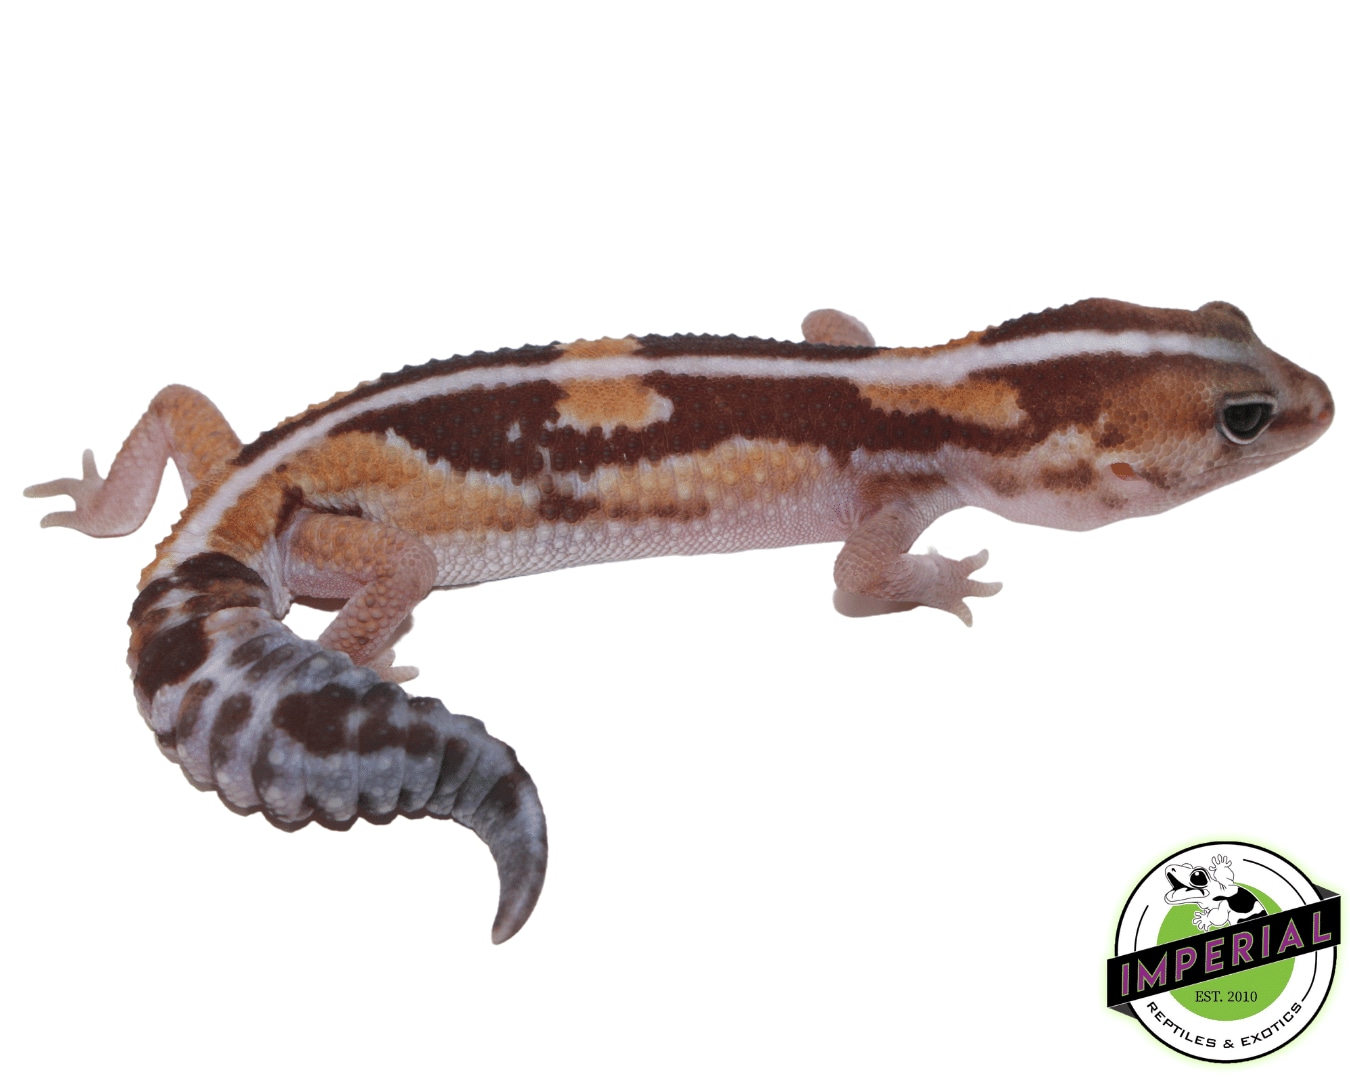 Zulu Stripe African Fat-Tailed Gecko by Imperial Reptiles & Exotics, LLC